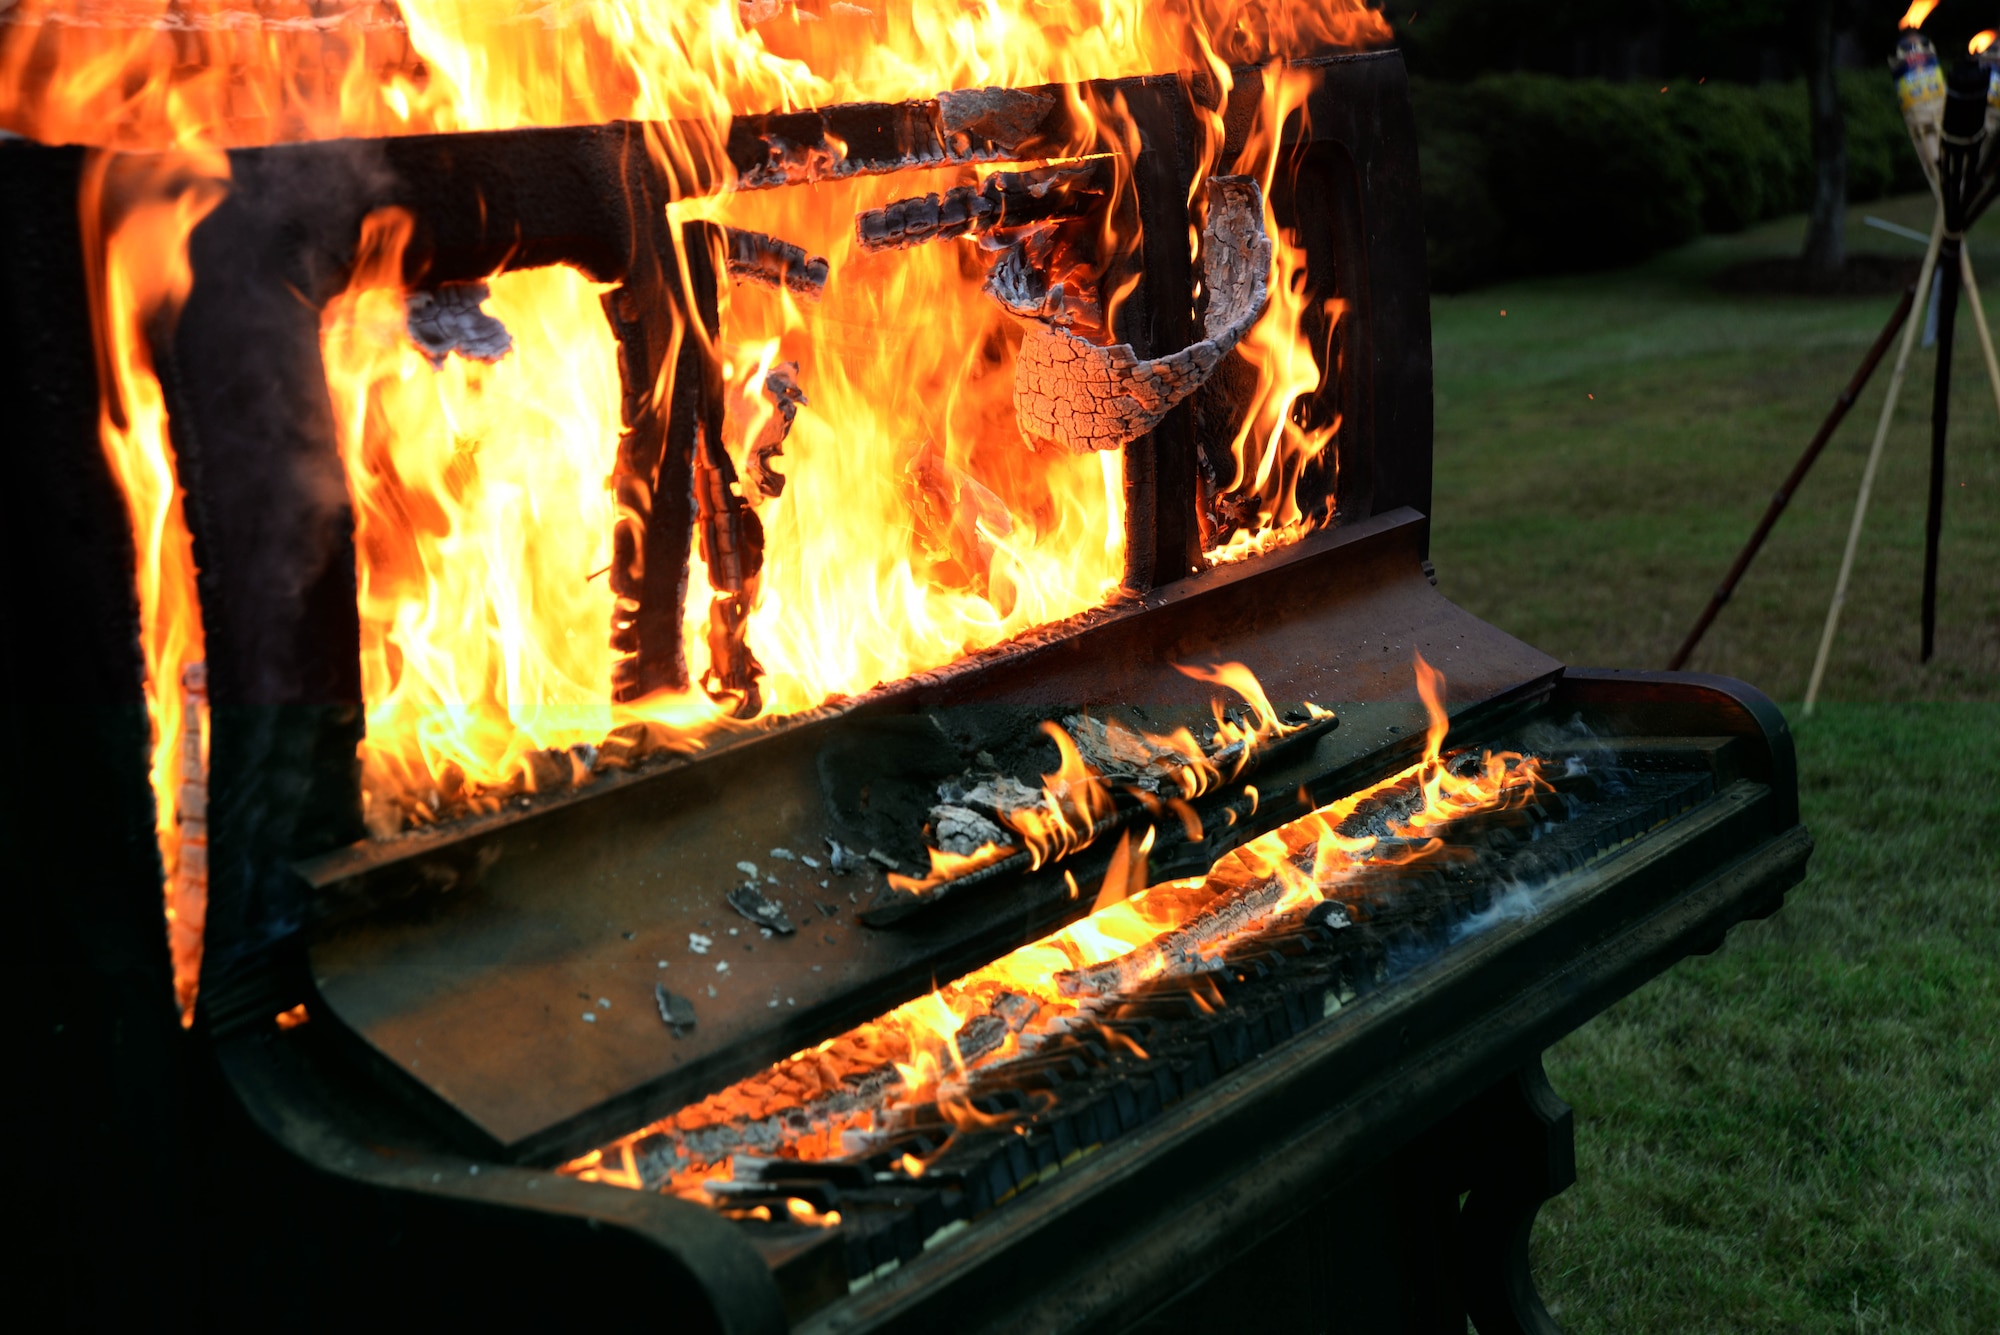 A piano goes up in flames during the celebration to commemorate the 75th anniversary of the Battle of Britain Sept. 11, 2015, at Maxwell Air Force Base, Alabama. Piano burning started as a Royal Air Force between World War I and World War II.  Although the history of its origin is unclear, it is often used to commemorate the Battle of Britain or a fallen comrade. (U.S. Air Force photo Airman 1st Class Alexa Culbert/Cleared)